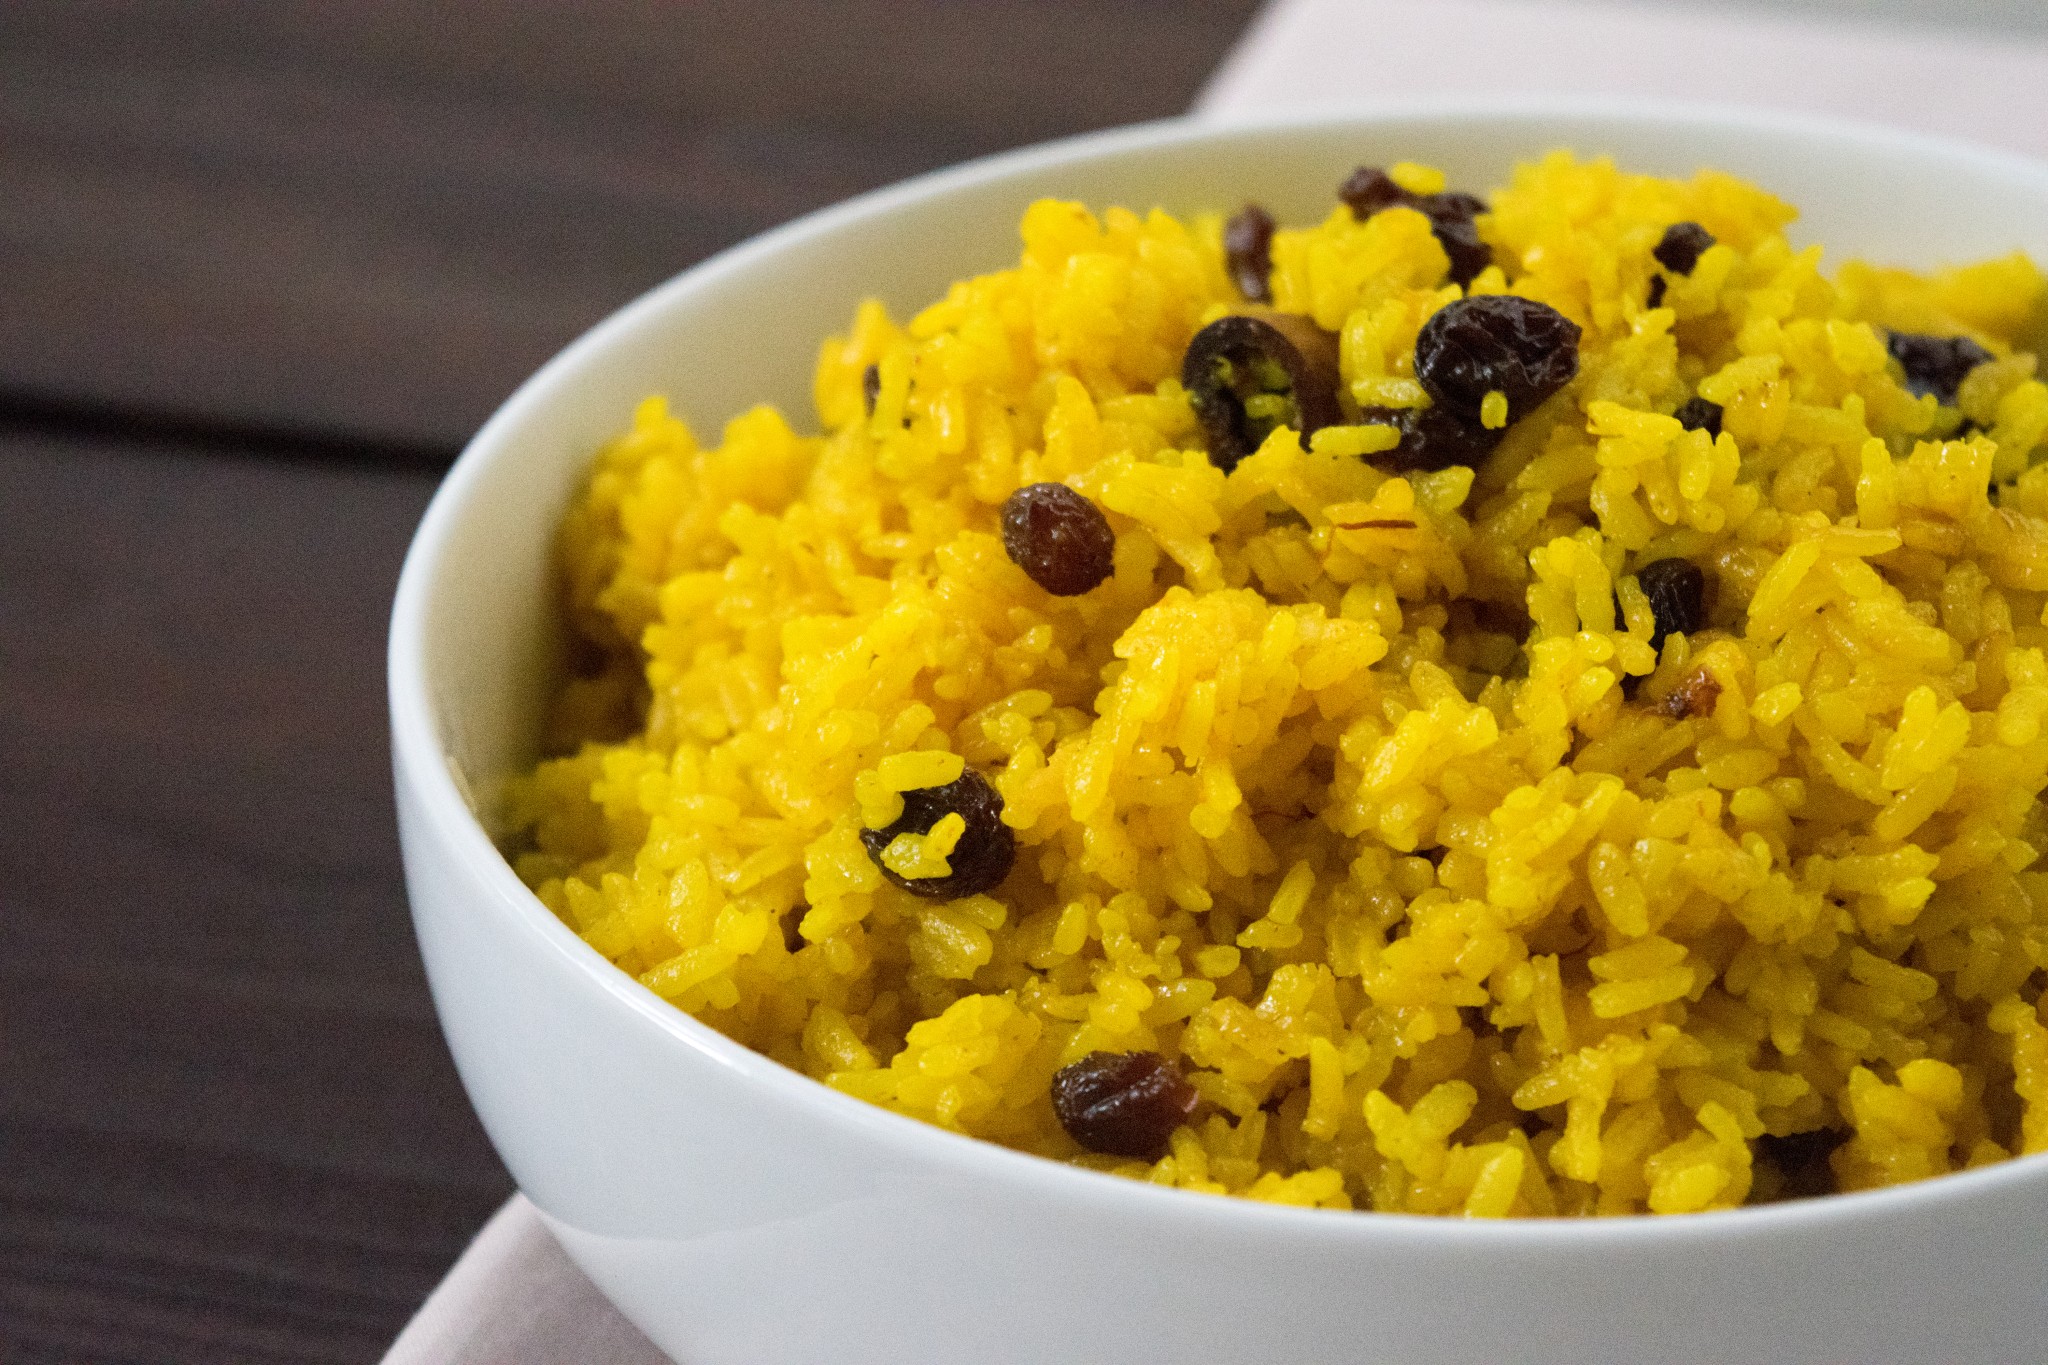 YELLOW RICE SOUTH AFRICA